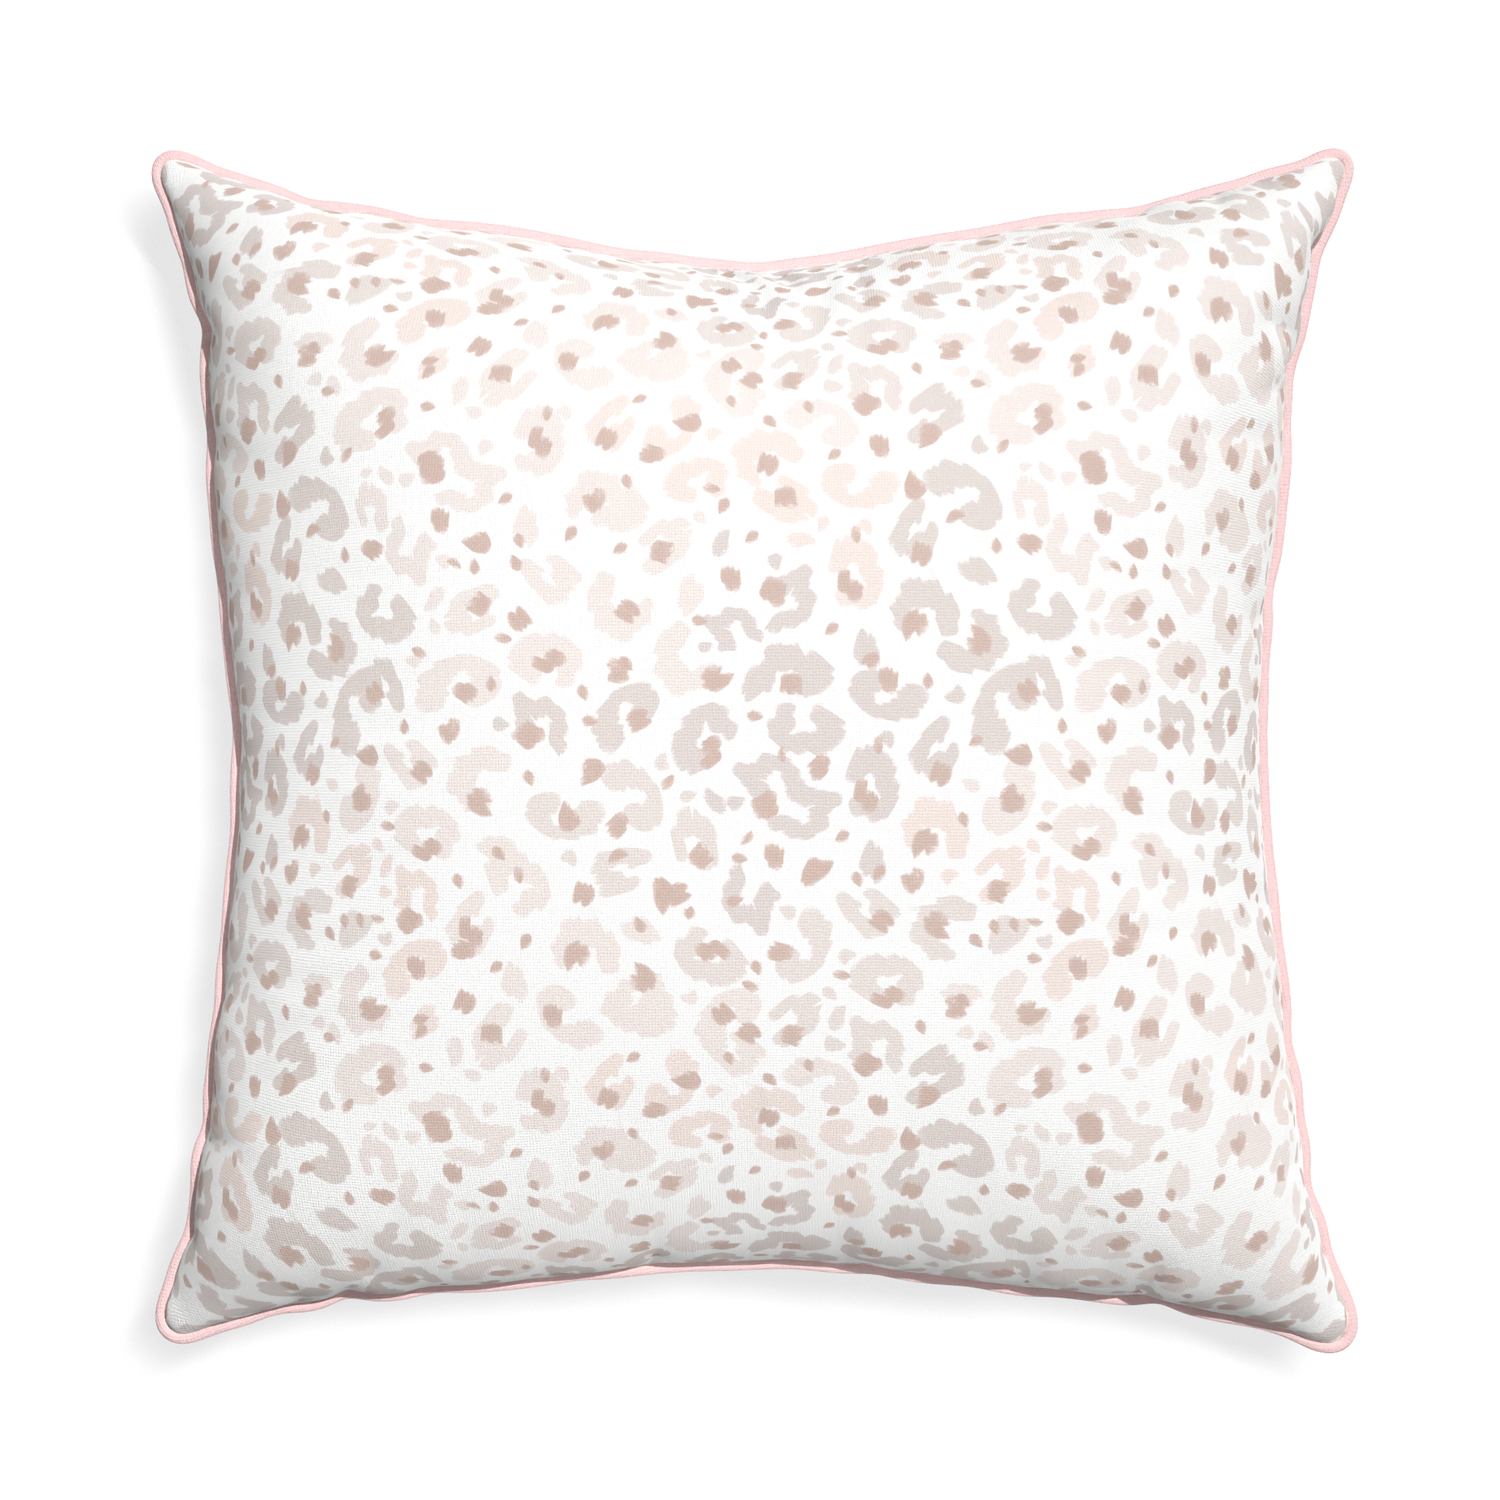 Euro-sham rosie custom beige animal printpillow with petal piping on white background